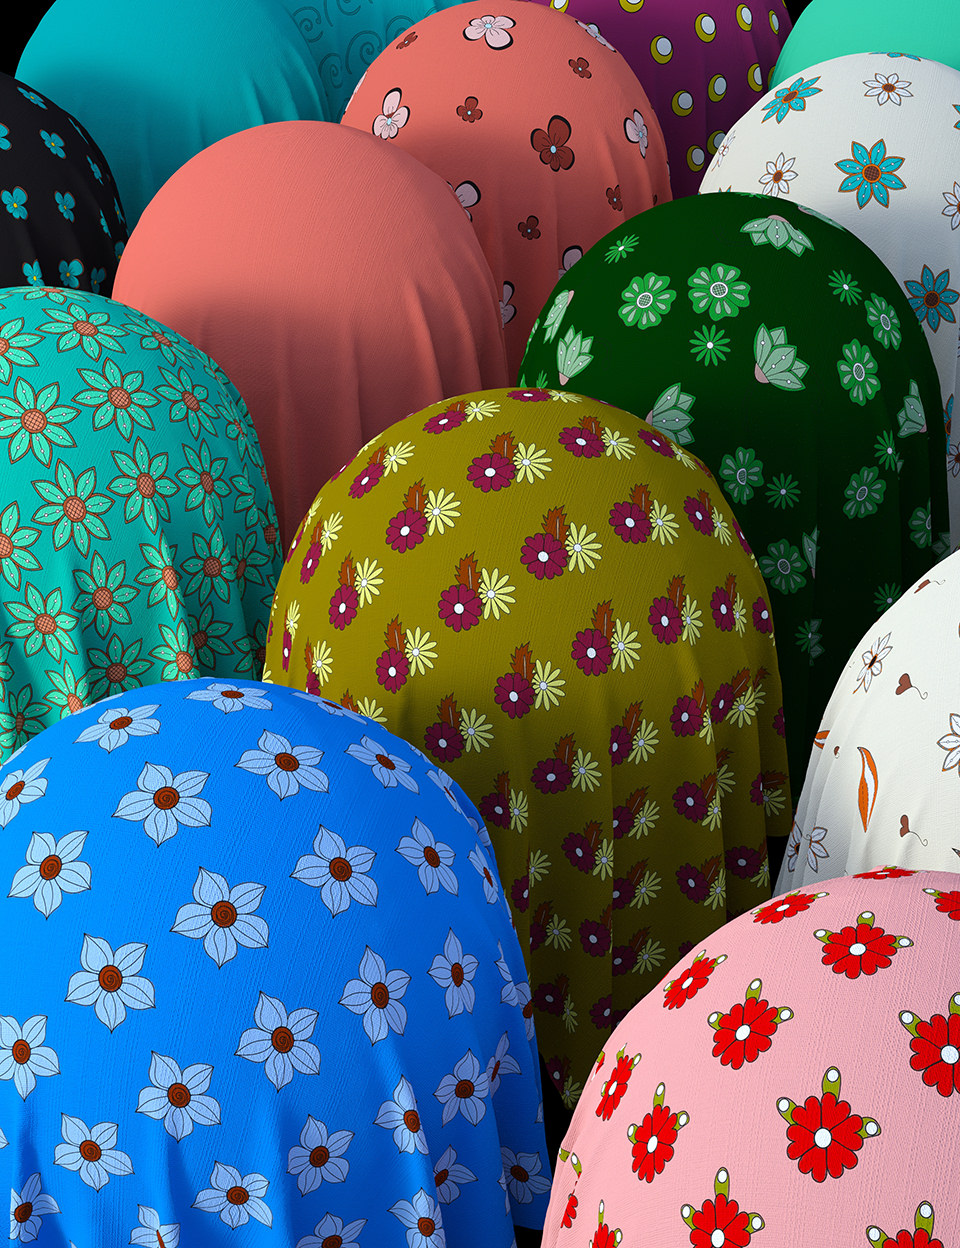 Floral Cotton Fabric Iray Shaders by: Nelmi, 3D Models by Daz 3D